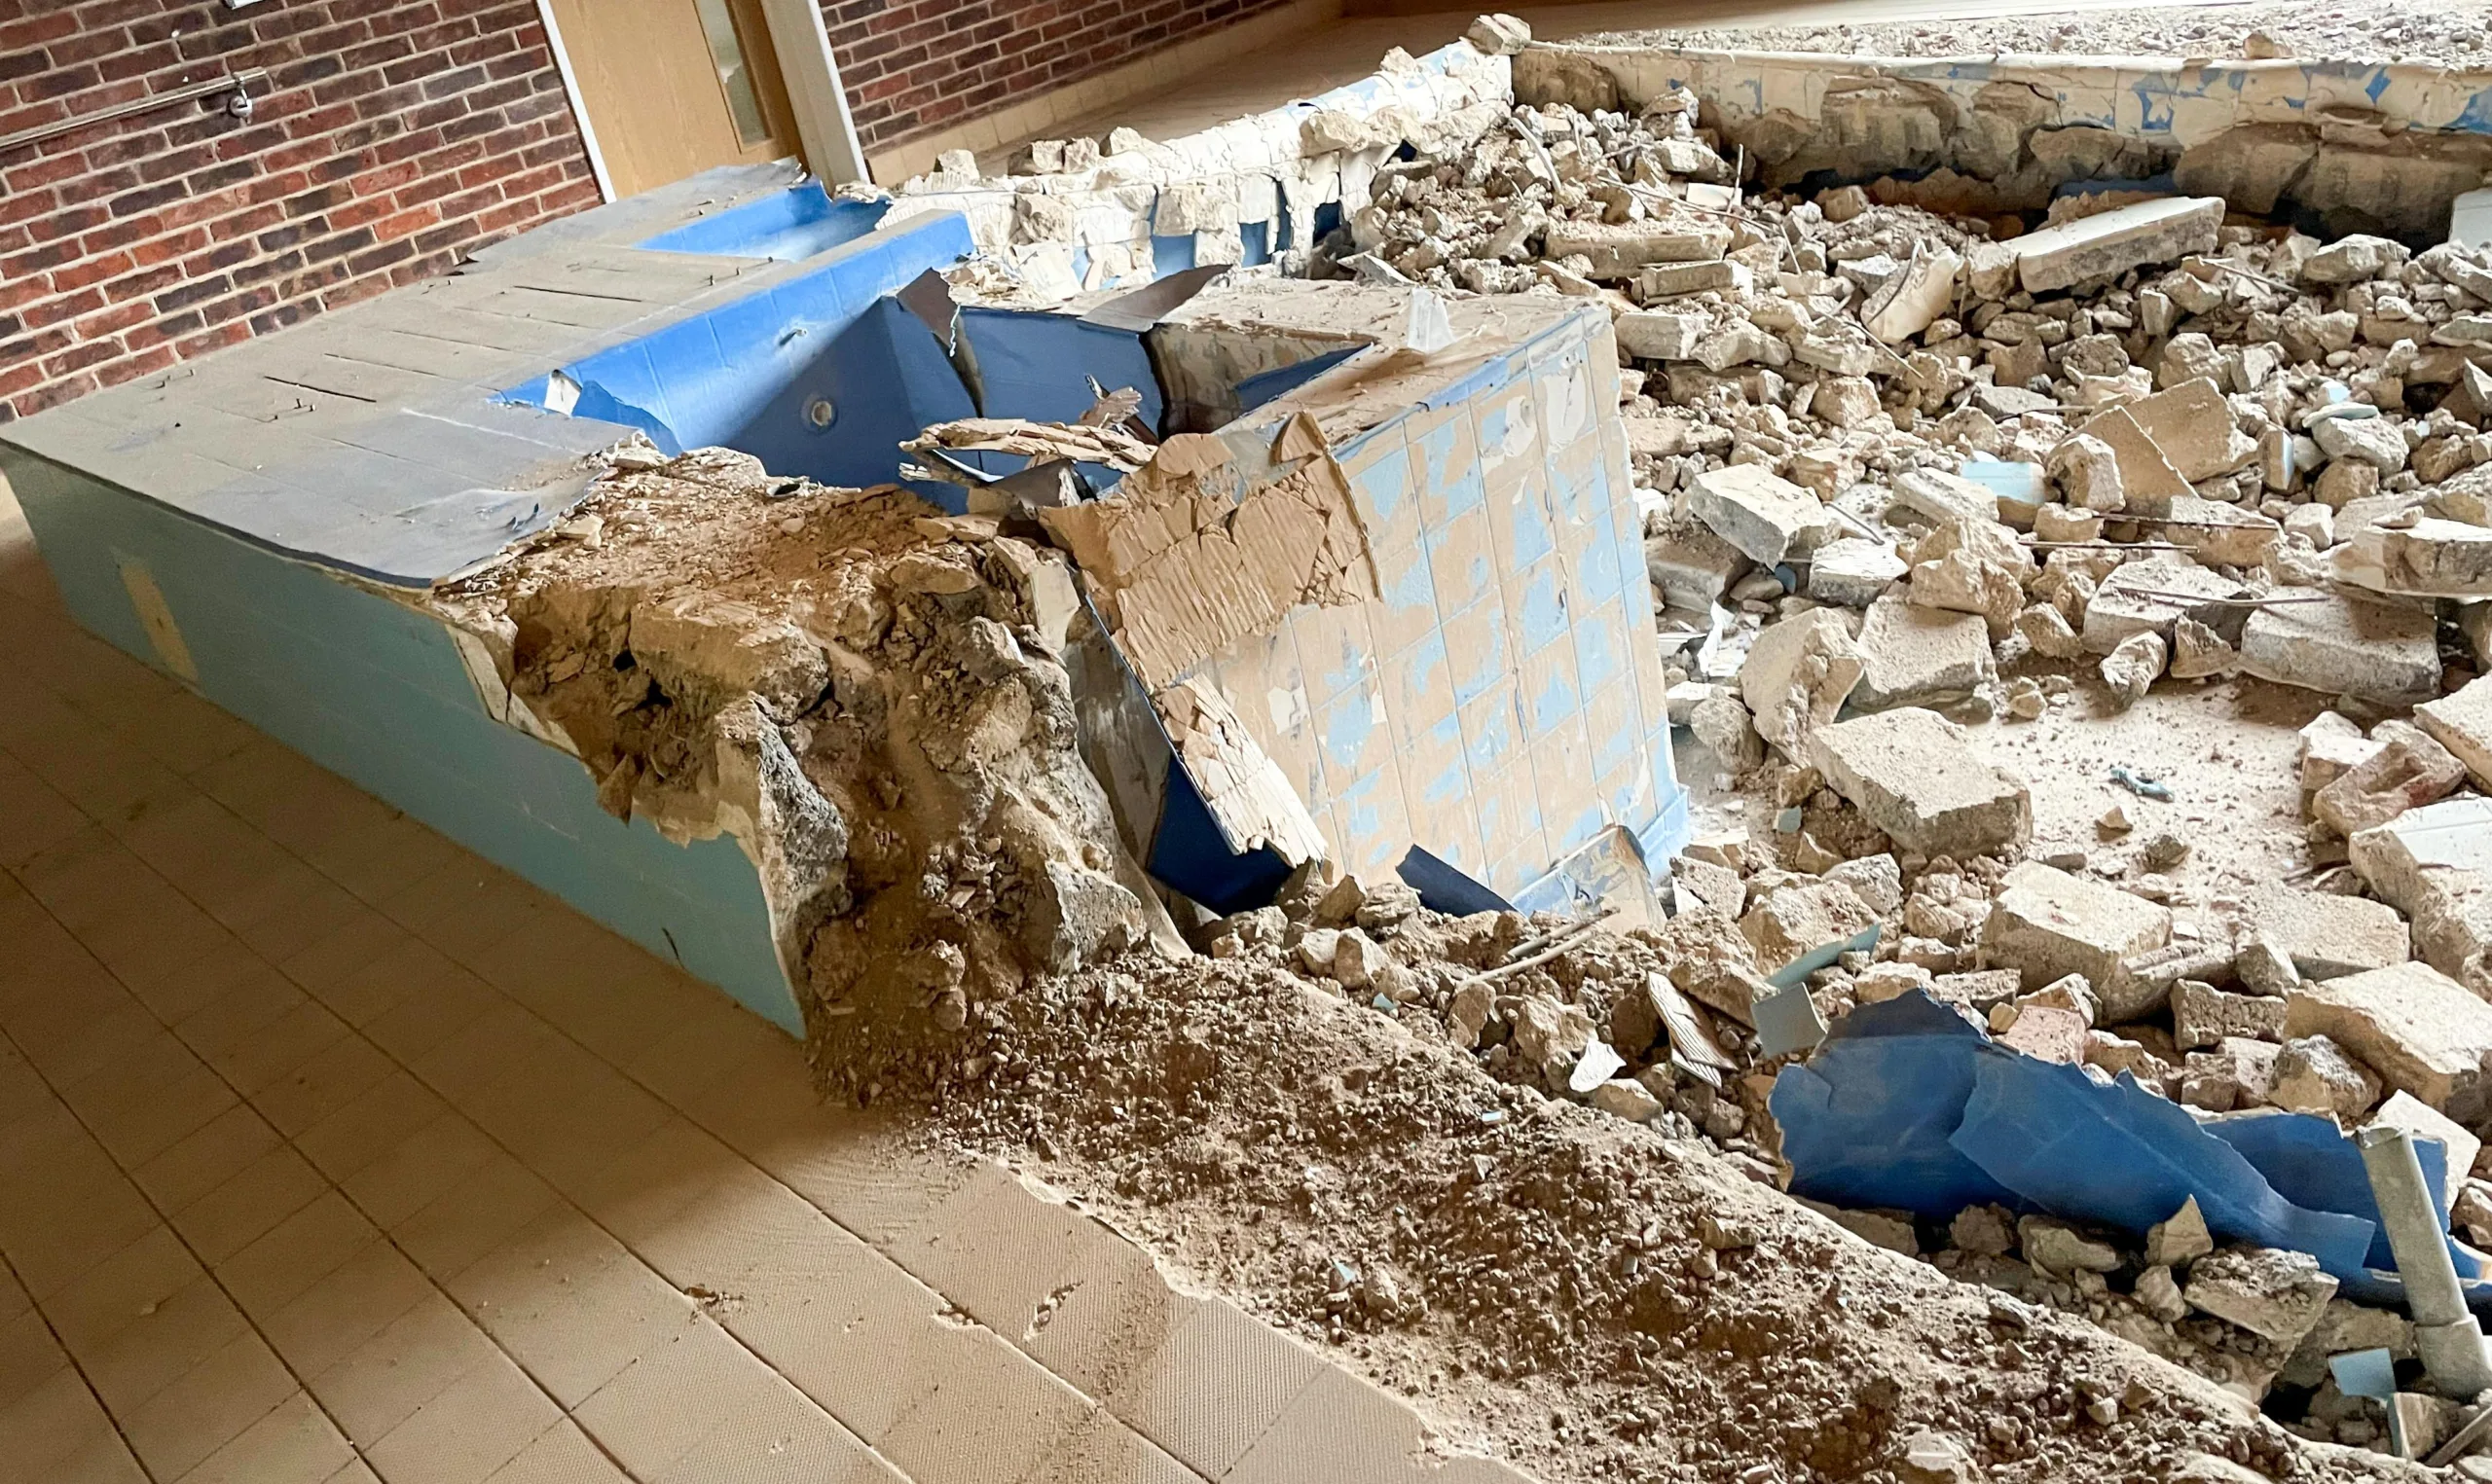 The scene that confronted Cllr John Fox when he obtained permission to visit the former St George’s hydrotherapy pool, Peterborough.